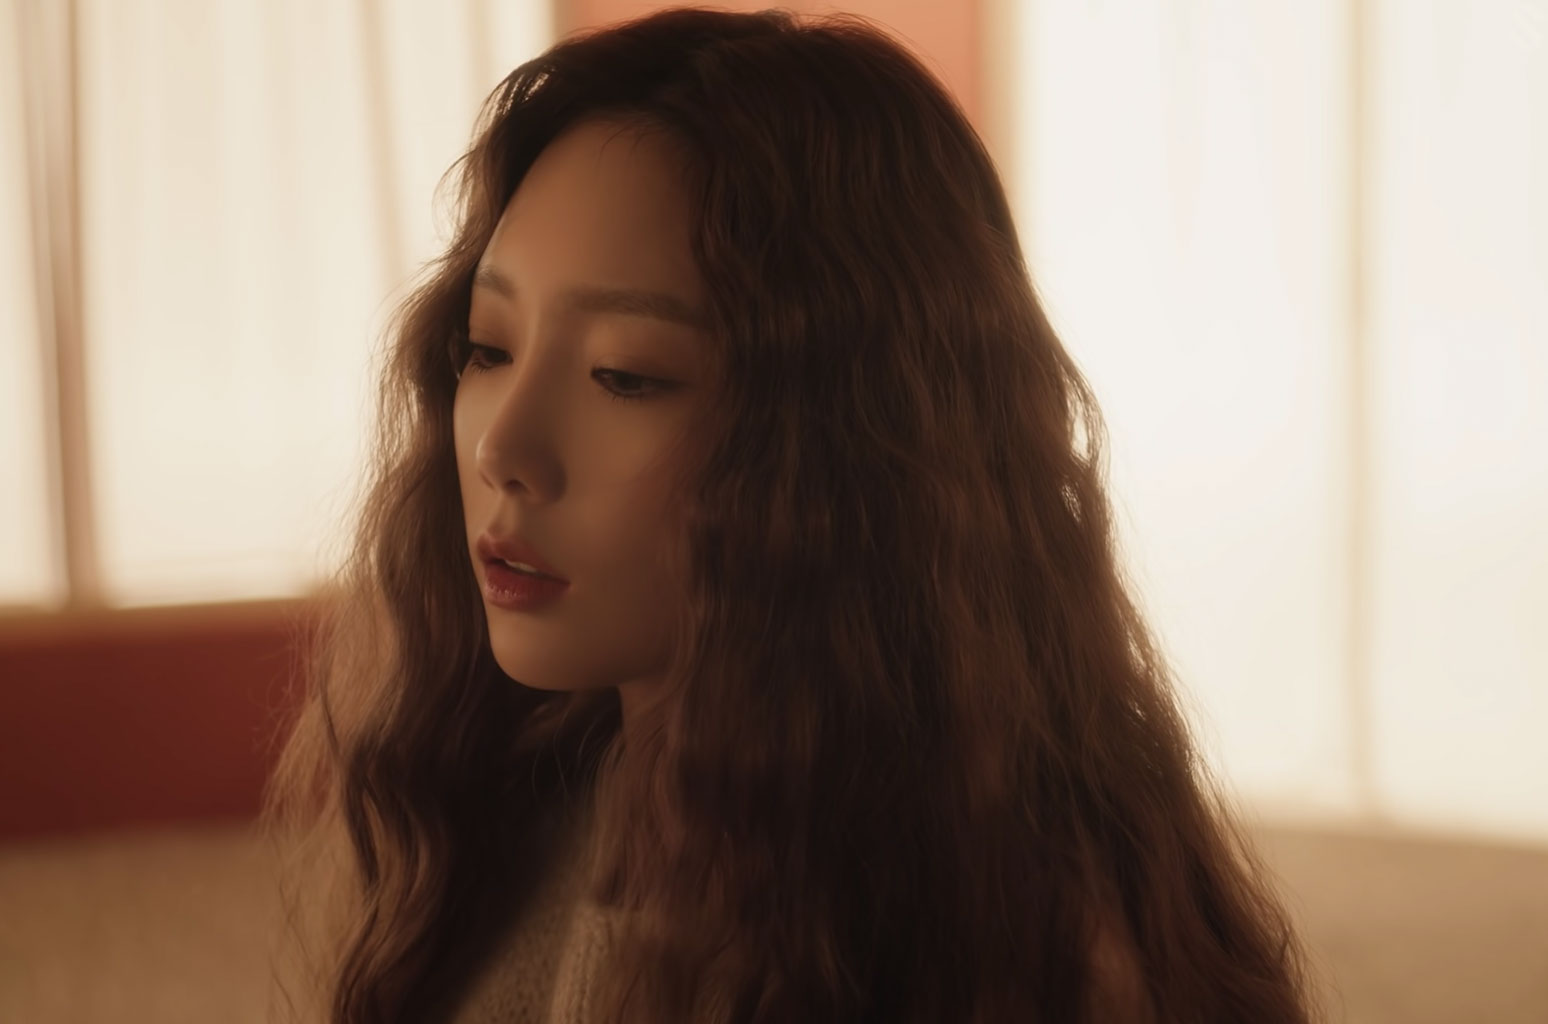 Taeyeon Shares Desire For Self-Love in 'Dear Me' Video: Watch